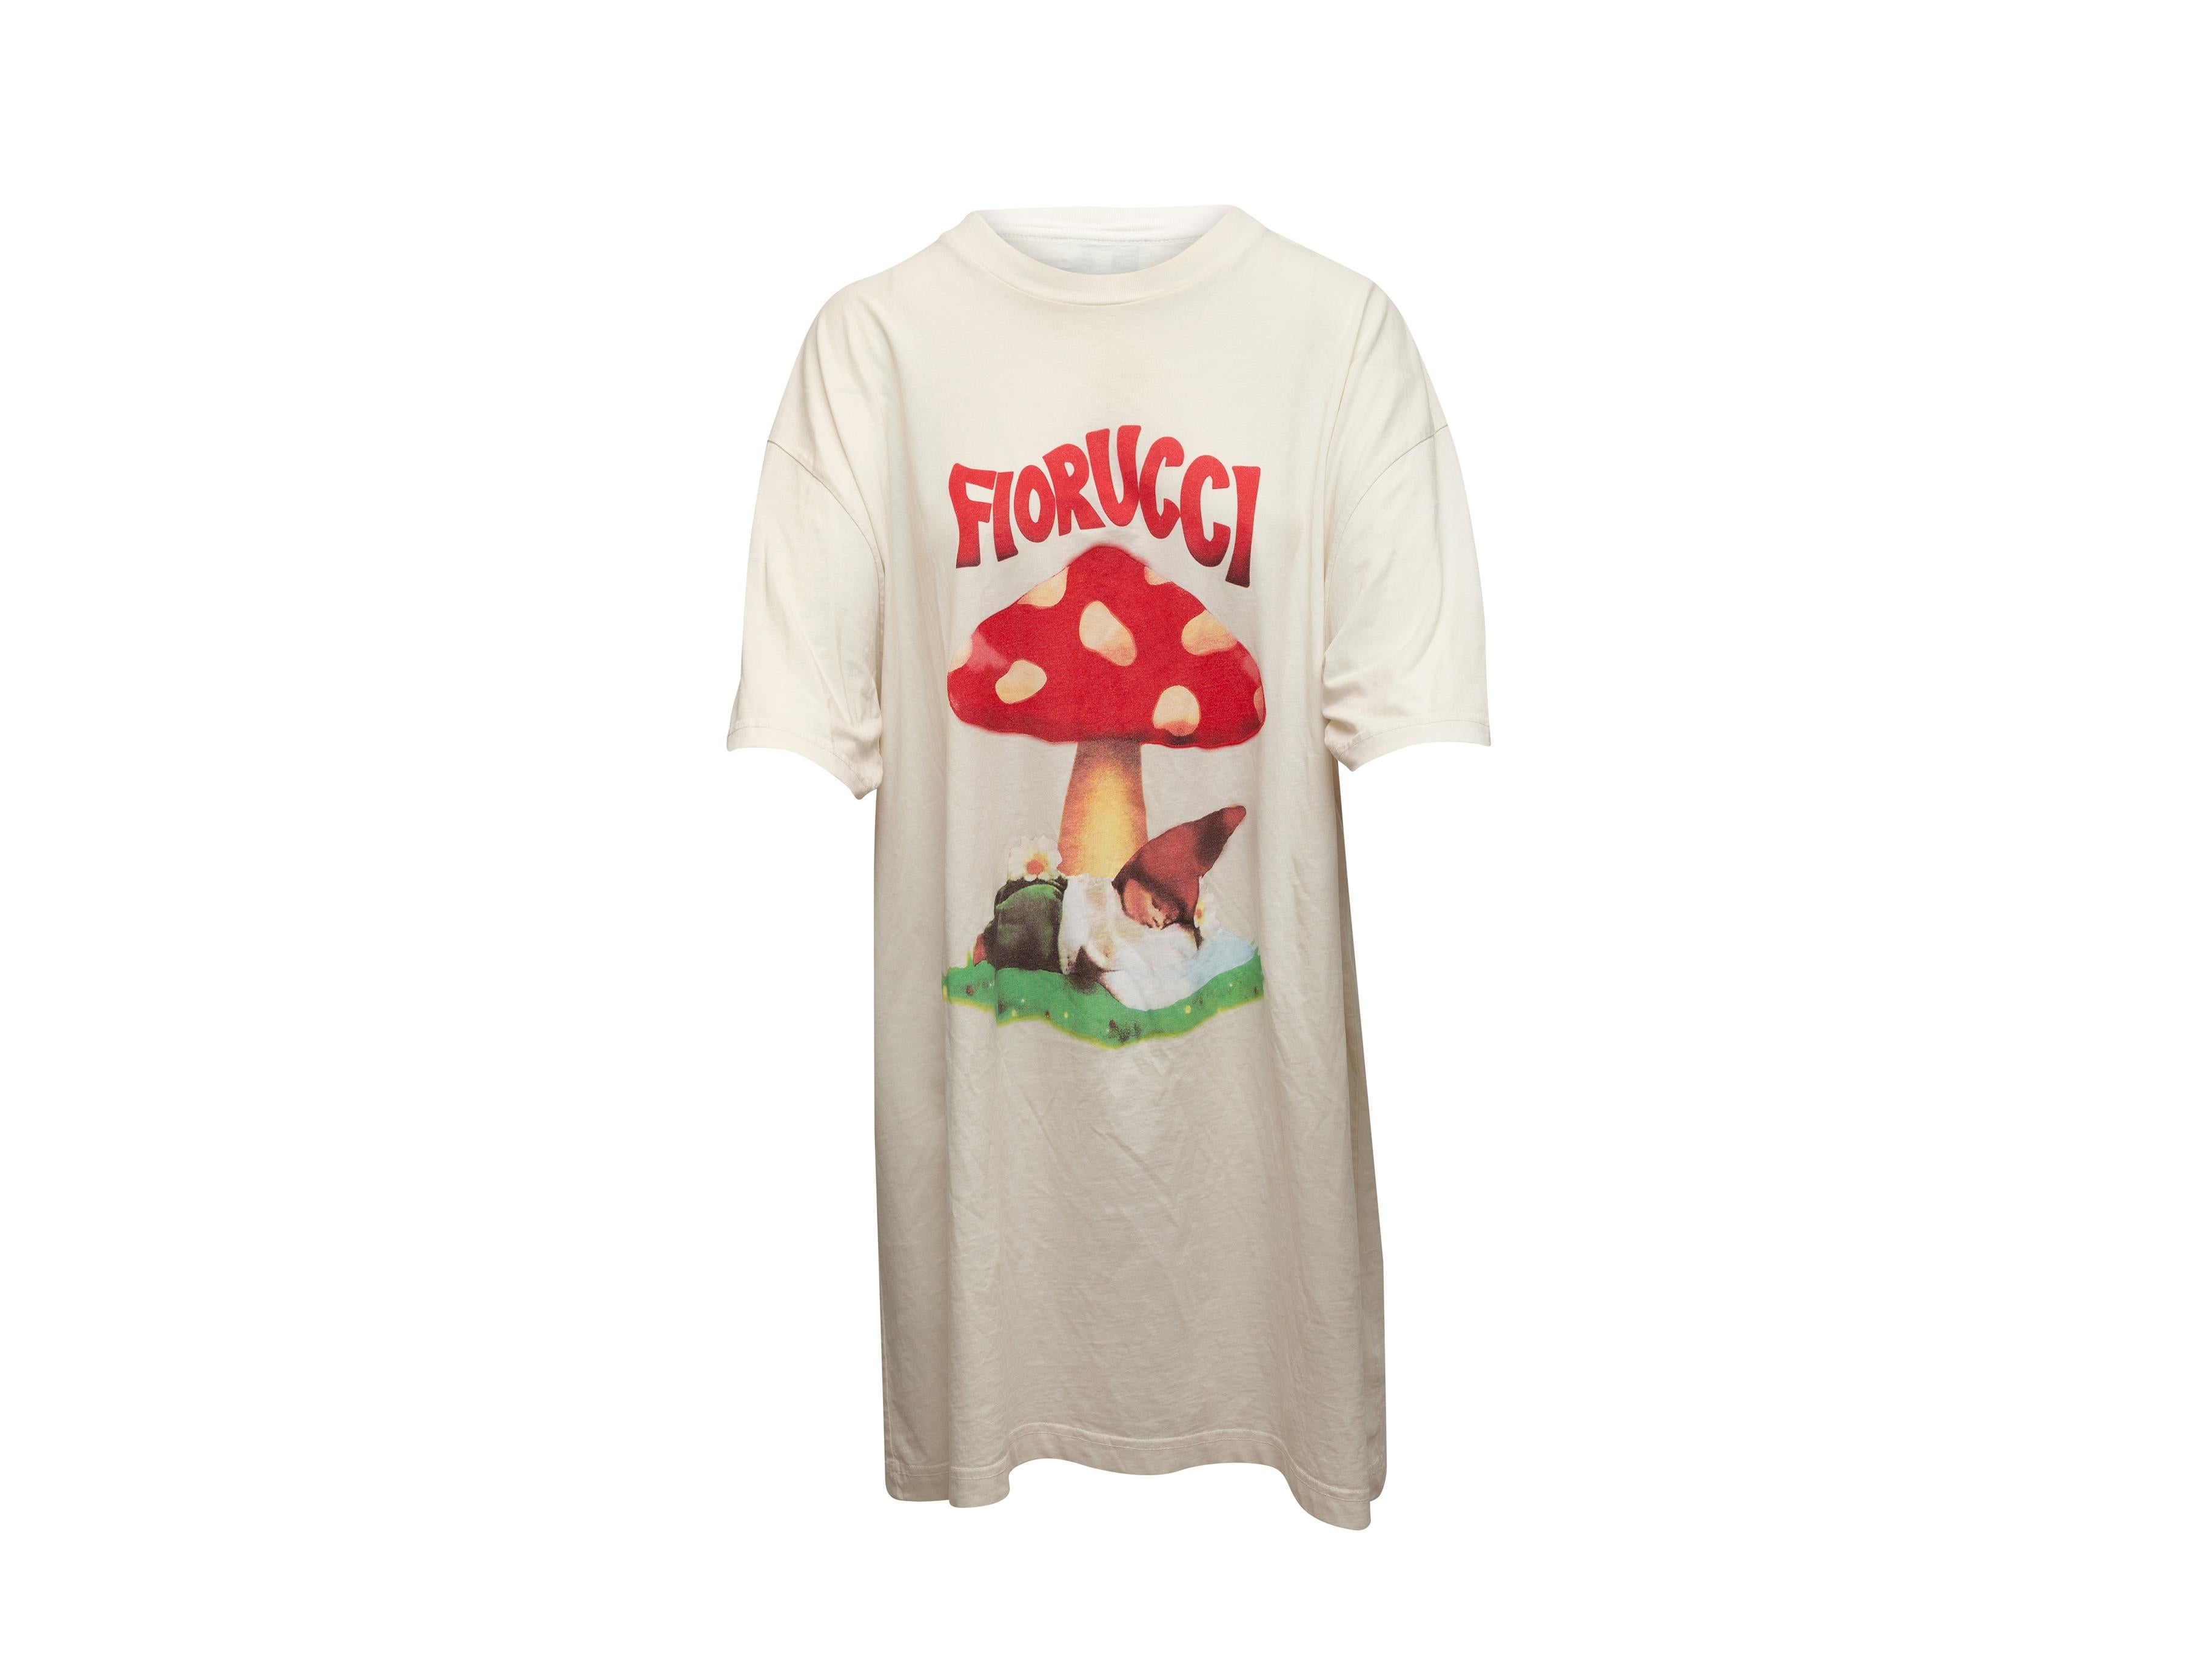 Product details: White and multicolor mushroom print graphic T-shirt by Fiorucci. Crew neck. Short sleeves. 48